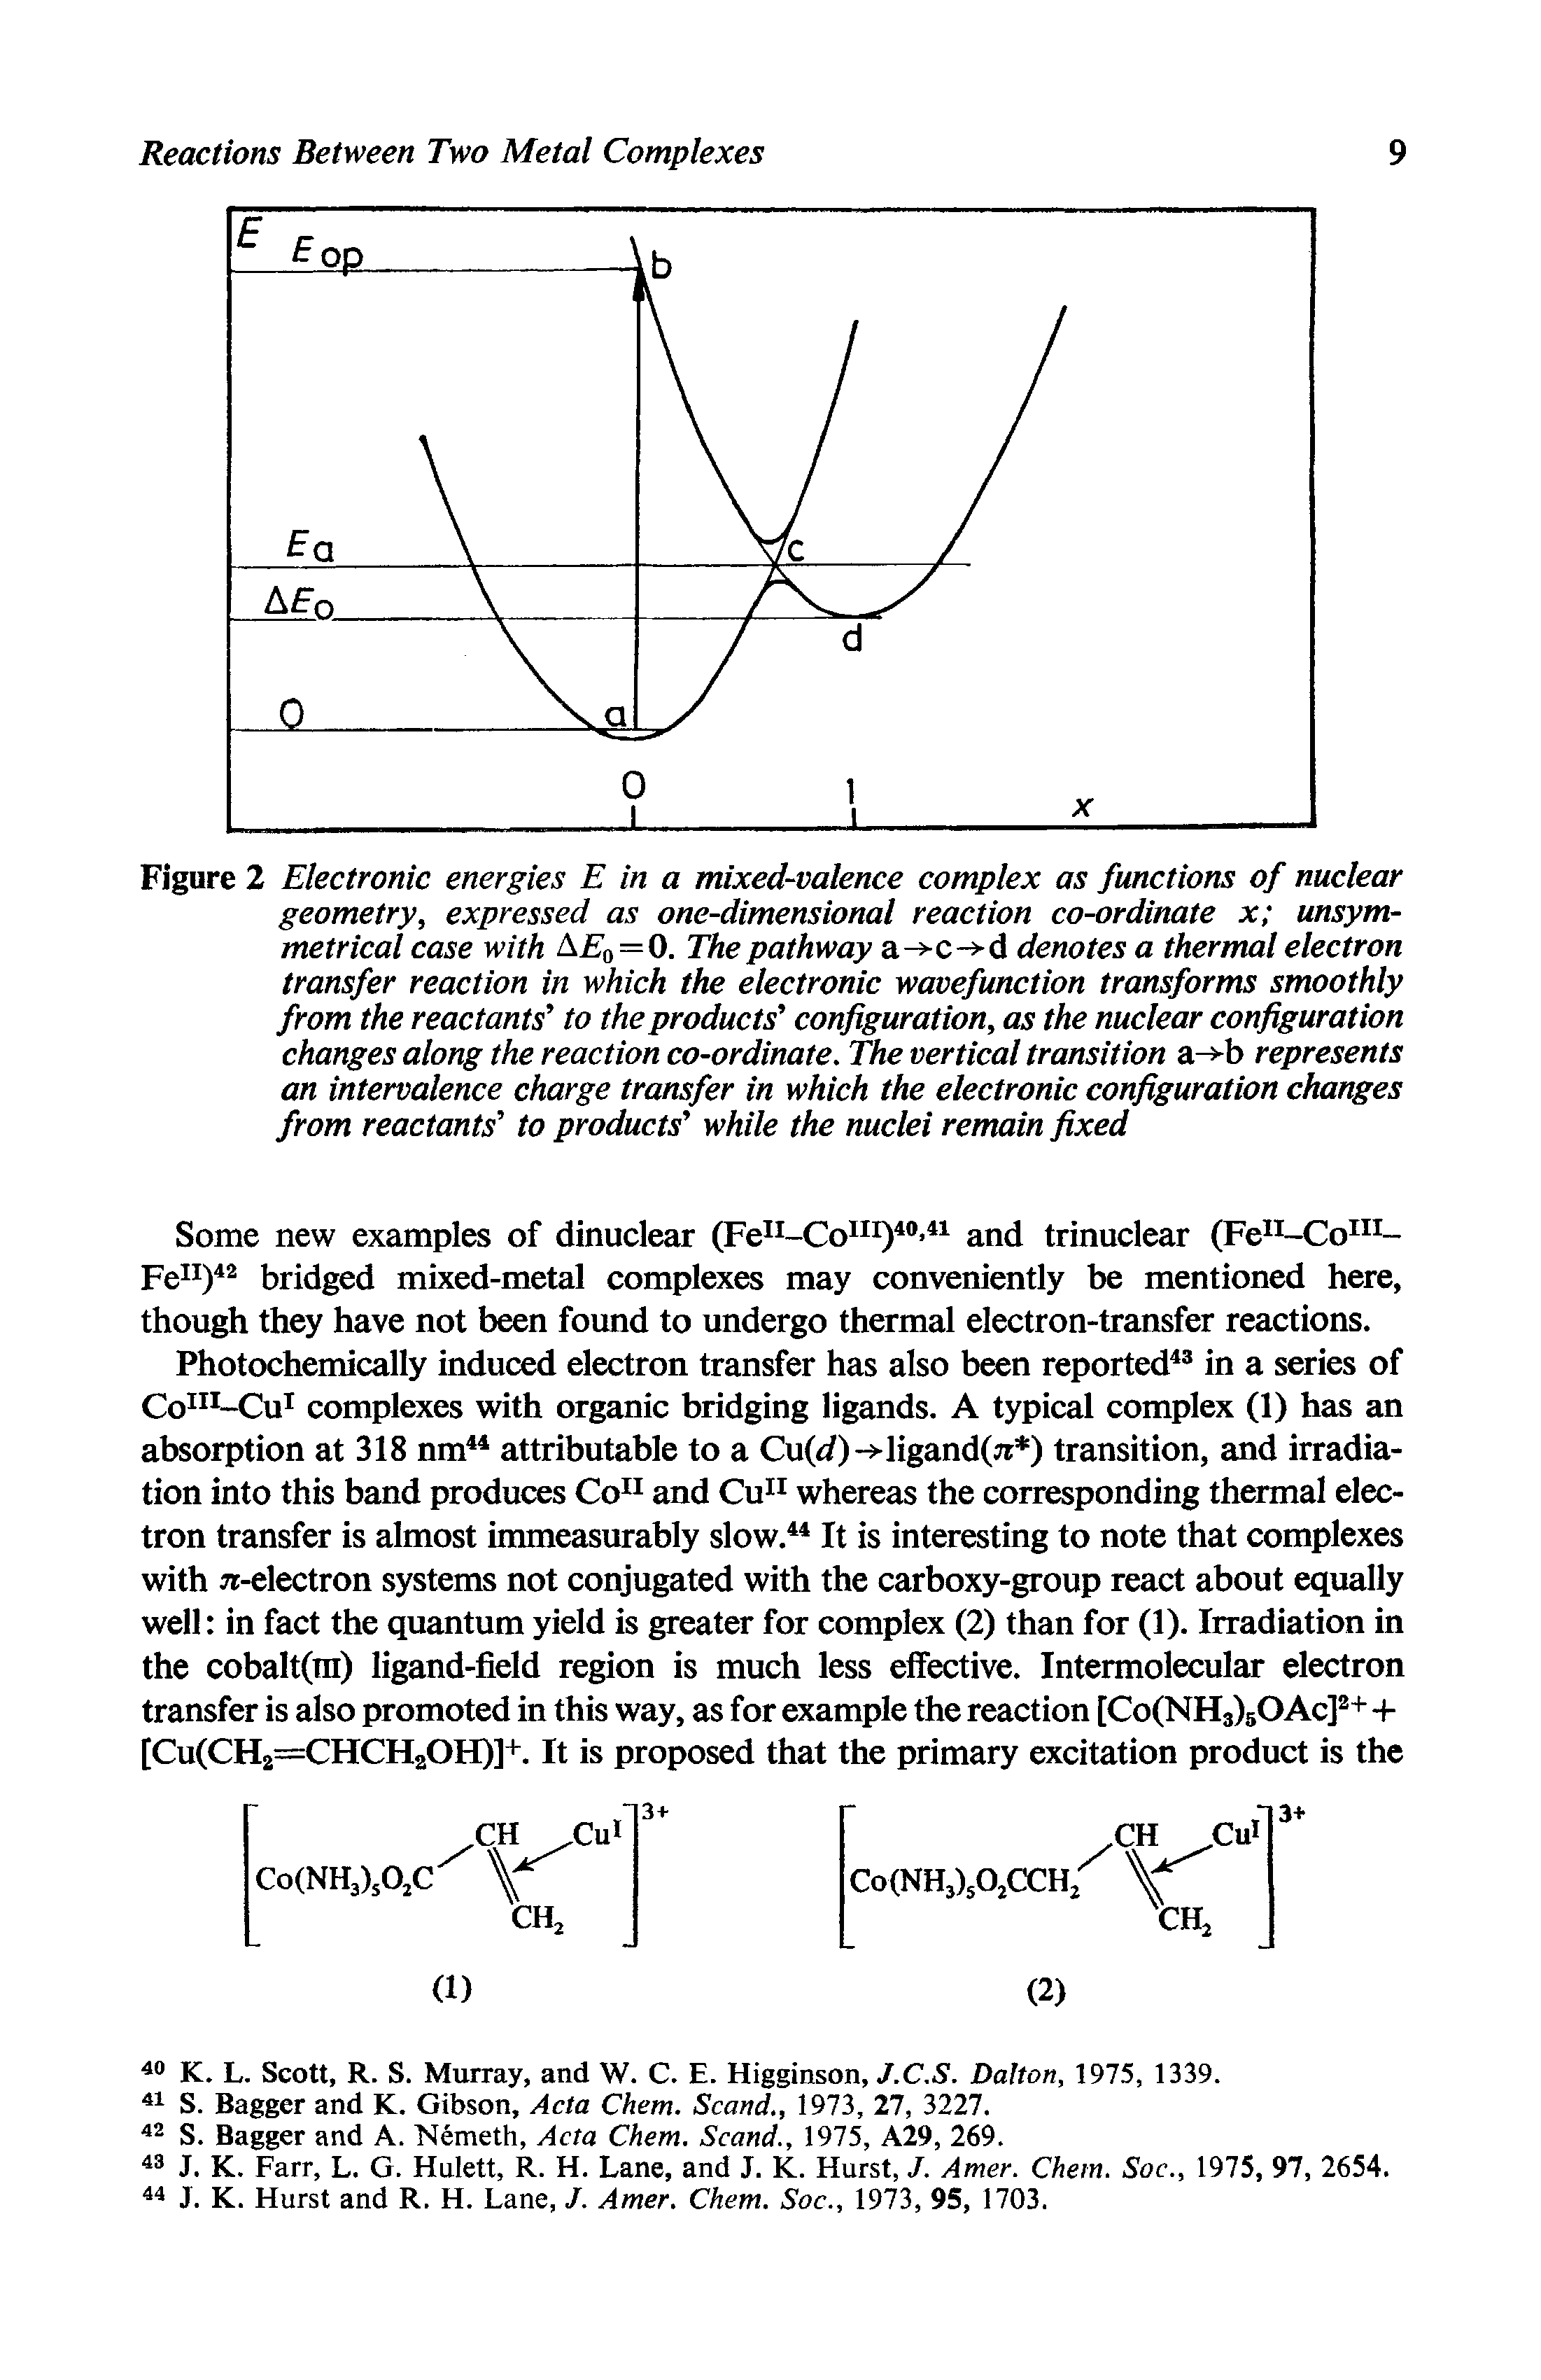 Figure 2 Electronic energies E in a mixed-valence complex as functions of nuclear geometry, expressed as one-dimensional reaction co-ordinate x unsym-metrical case with A o=0. The pathway a->c- d denotes a thermal electron transfer reaction in which the electronic wavefunction transforms smoothly from the reactants to the products configuration, as the nuclear configuration changes along the reaction co-ordinate. The vertical transition a- -b represents an intervalence charge transfer in which the electronic configuration changes from reactants to products while the nuclei remain fixed...